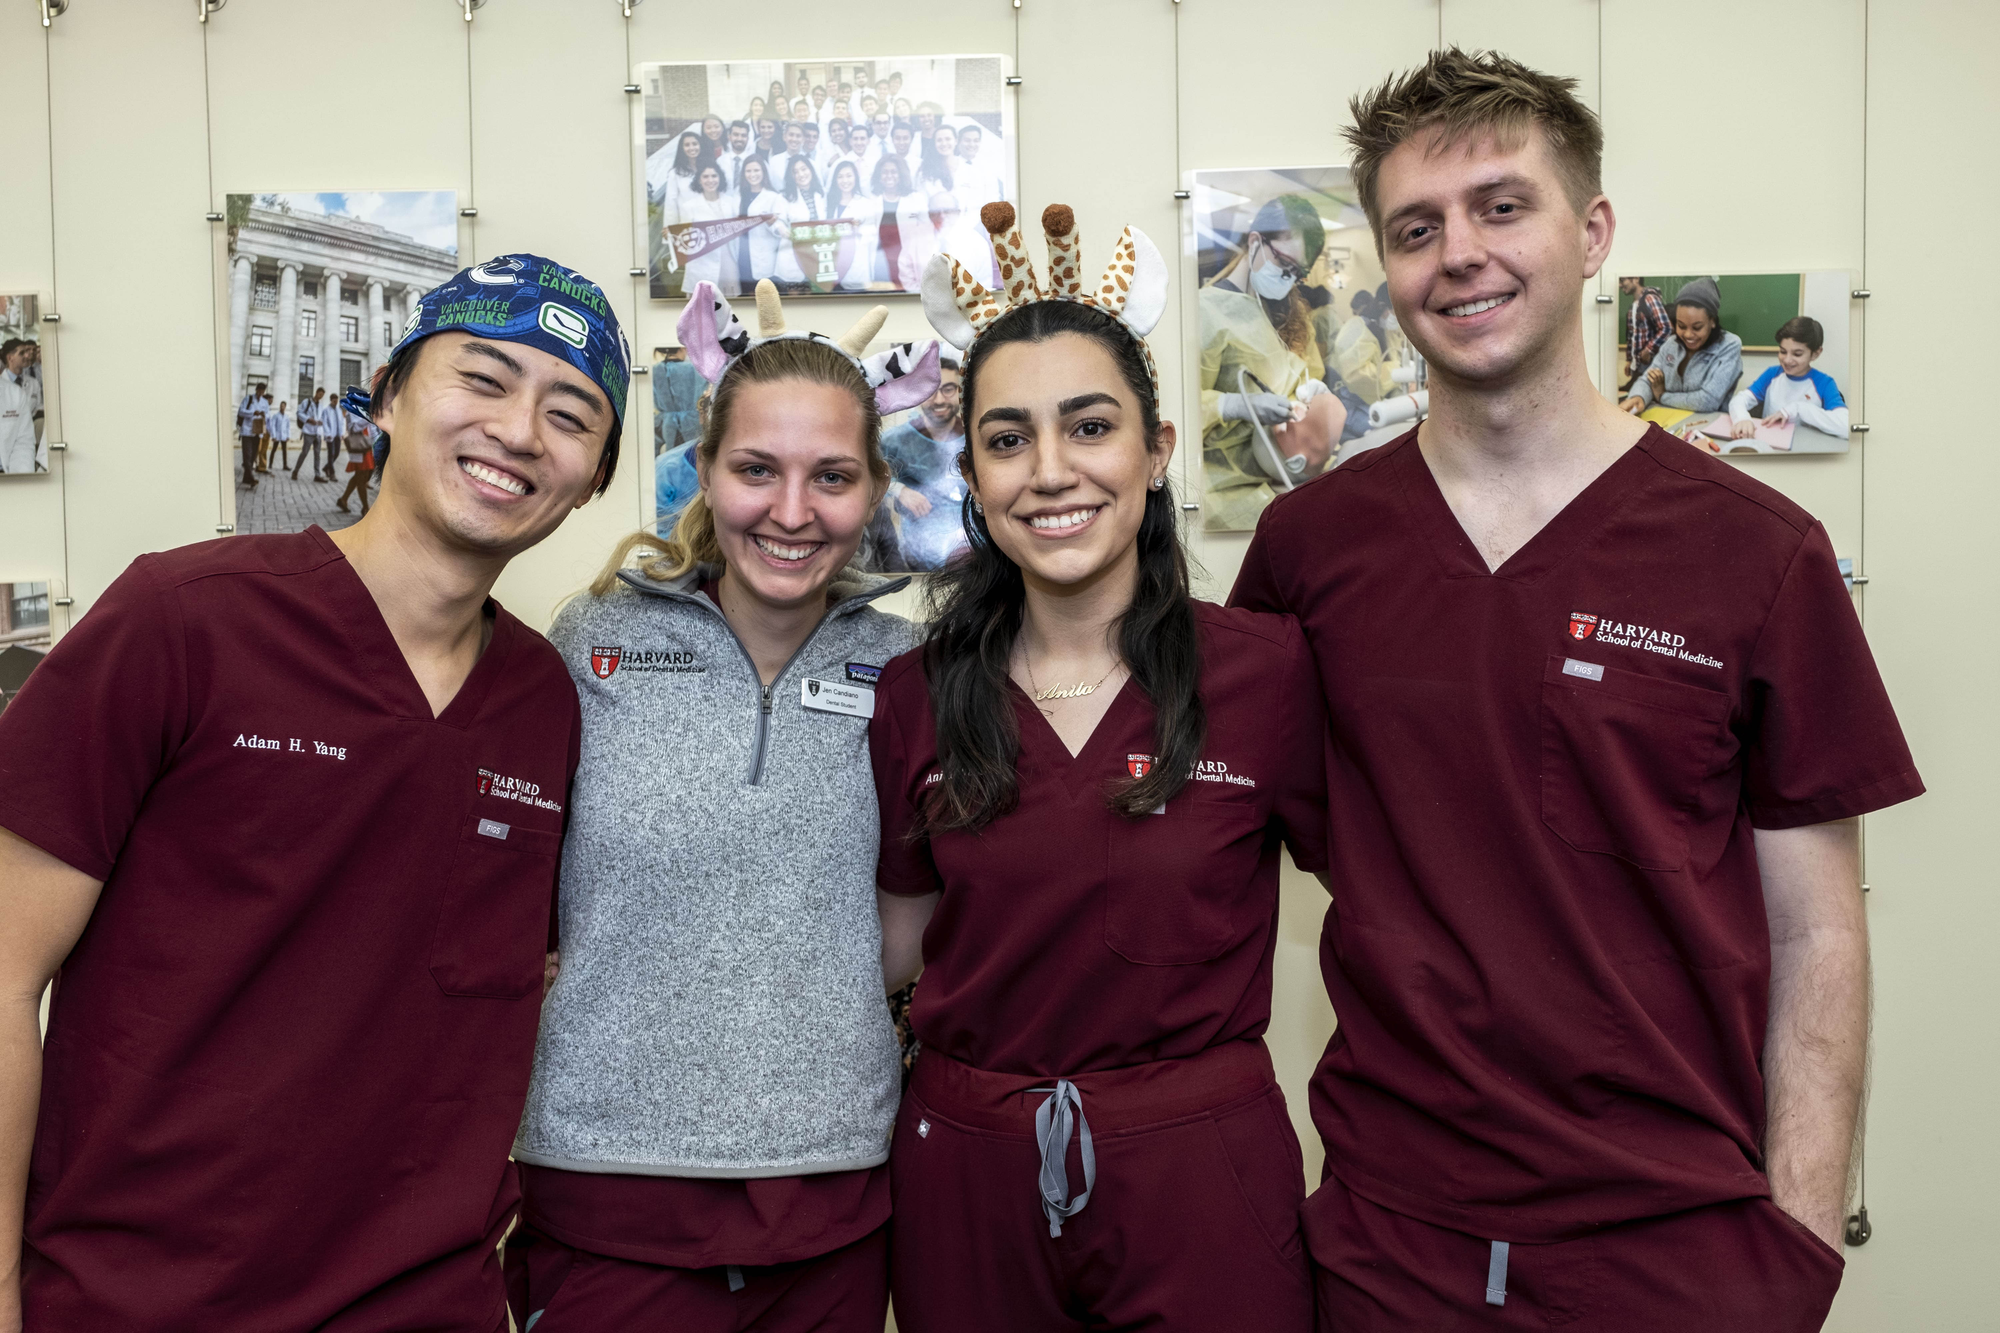 Four students standing together wearing crimson scrubs